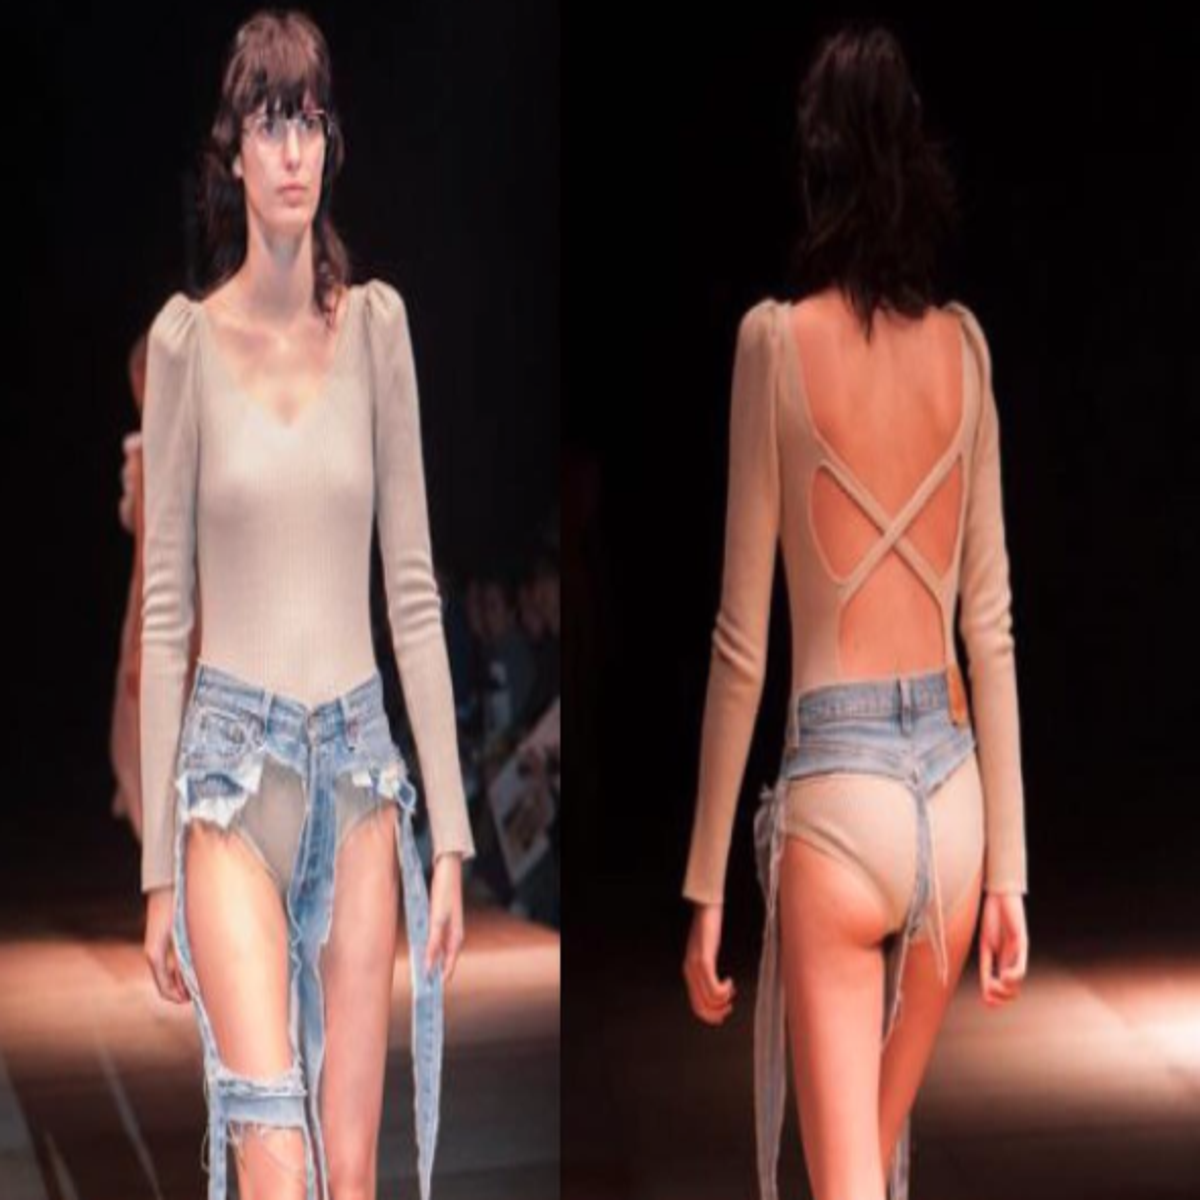 Thong jeans: A designer just debuted denim that exposes your entire bum, The Independent